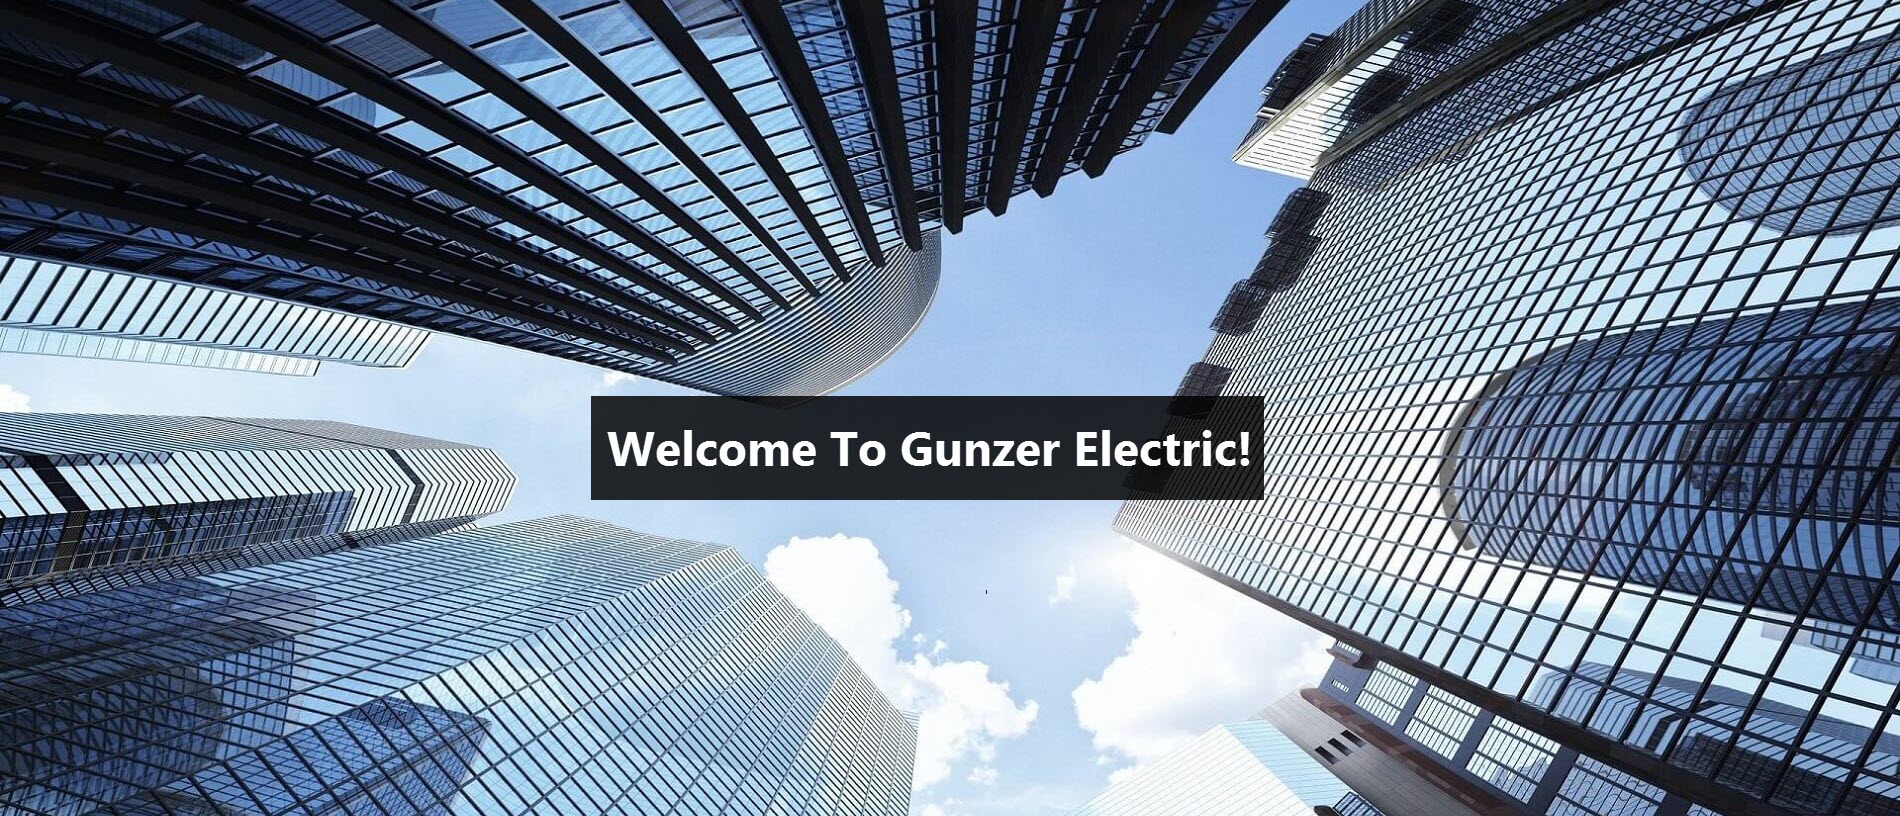 gunzer-electric-ny-electrical-contractors-lighting-nyc-for-over-30-years